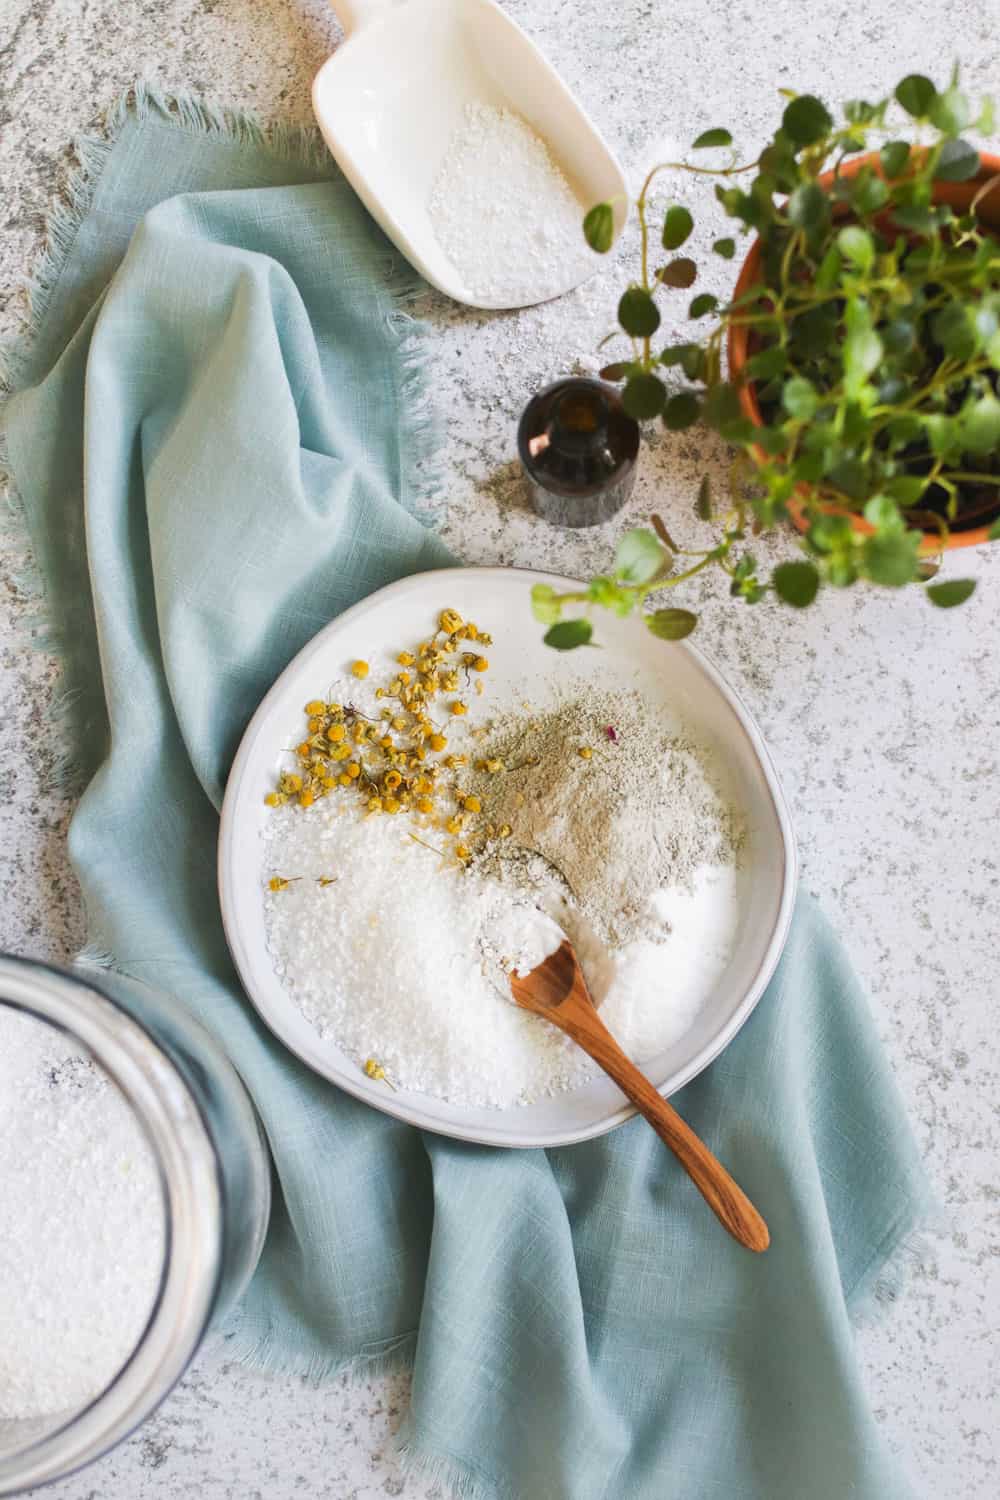 Treat Yourself to This Relaxing Epsom Salt Foot Soak